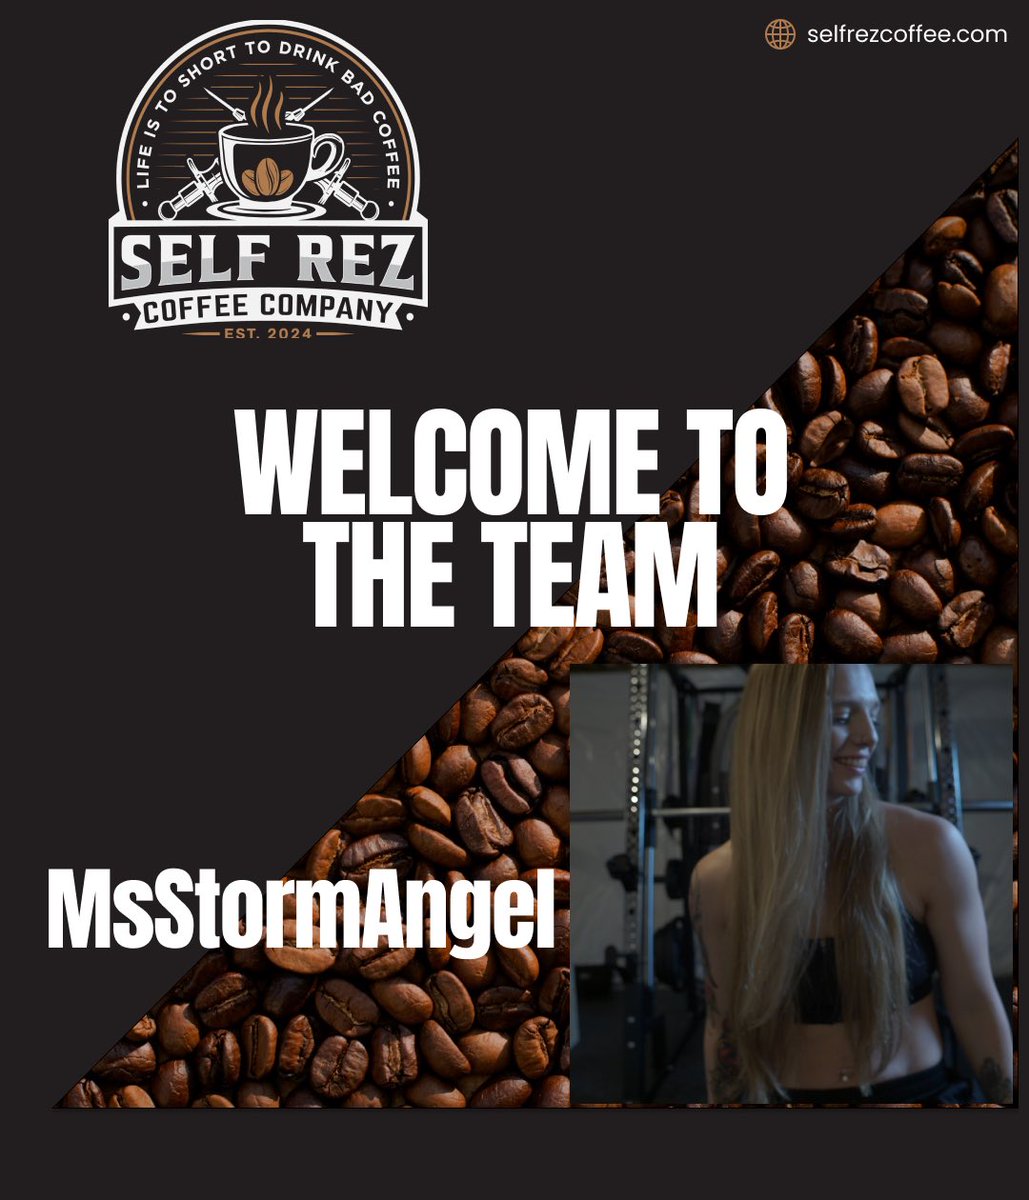 We have teamed up with @MsStormAngel, who shares our passion for living a healthy lifestyle! Here's to a journey of wellness and vitality! Help us welcome her to the team as our newest Partner! 💪✨ #NewPartnership #HealthyLifestyle #WellnessJourney 🍏🧘‍♂️